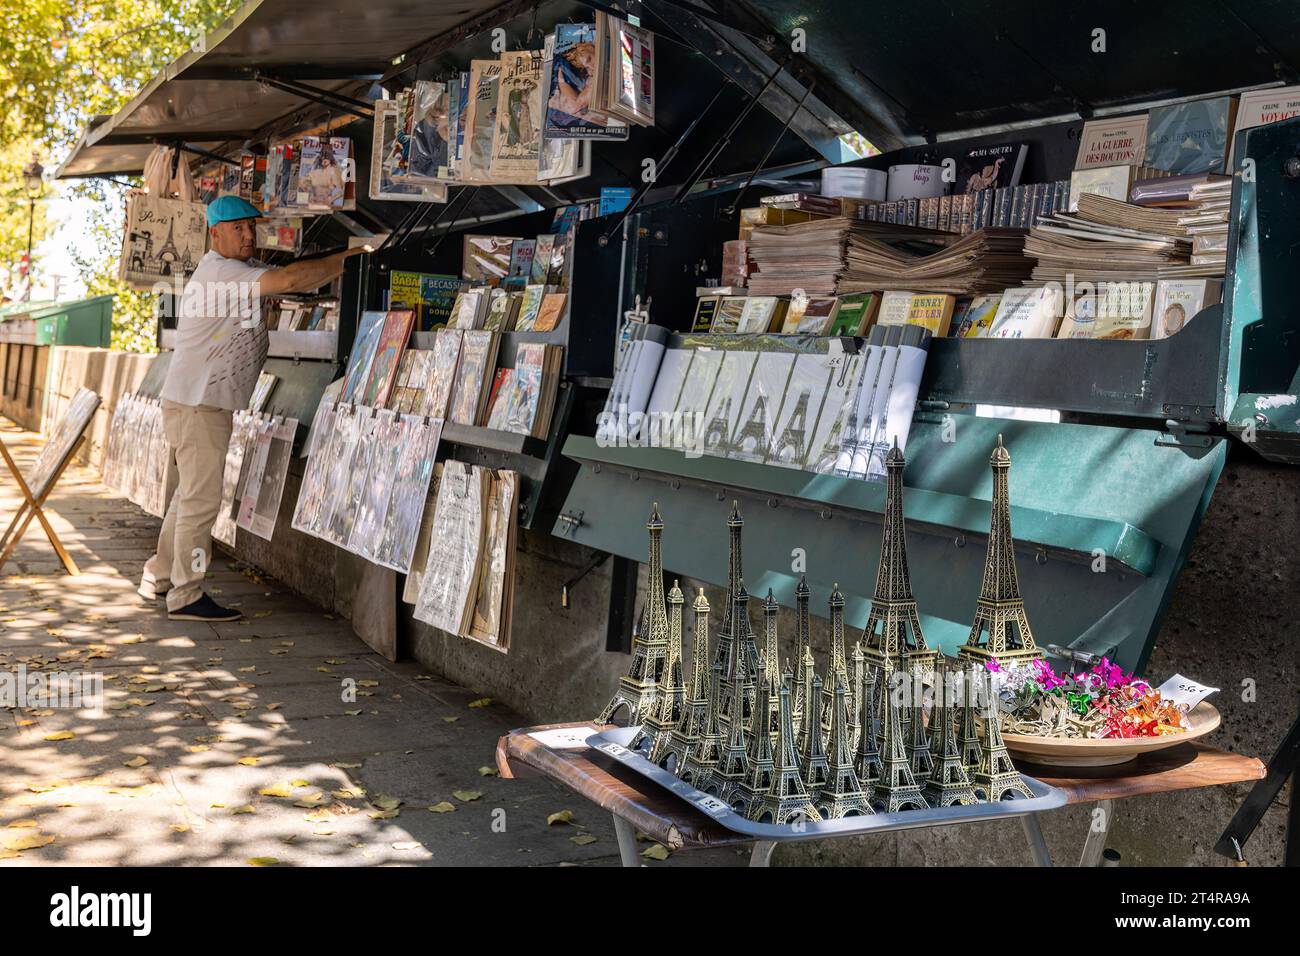 Bouquinistes, or sellers of used books and magazines along the Seine, Paris, France, Europe Stock Photo